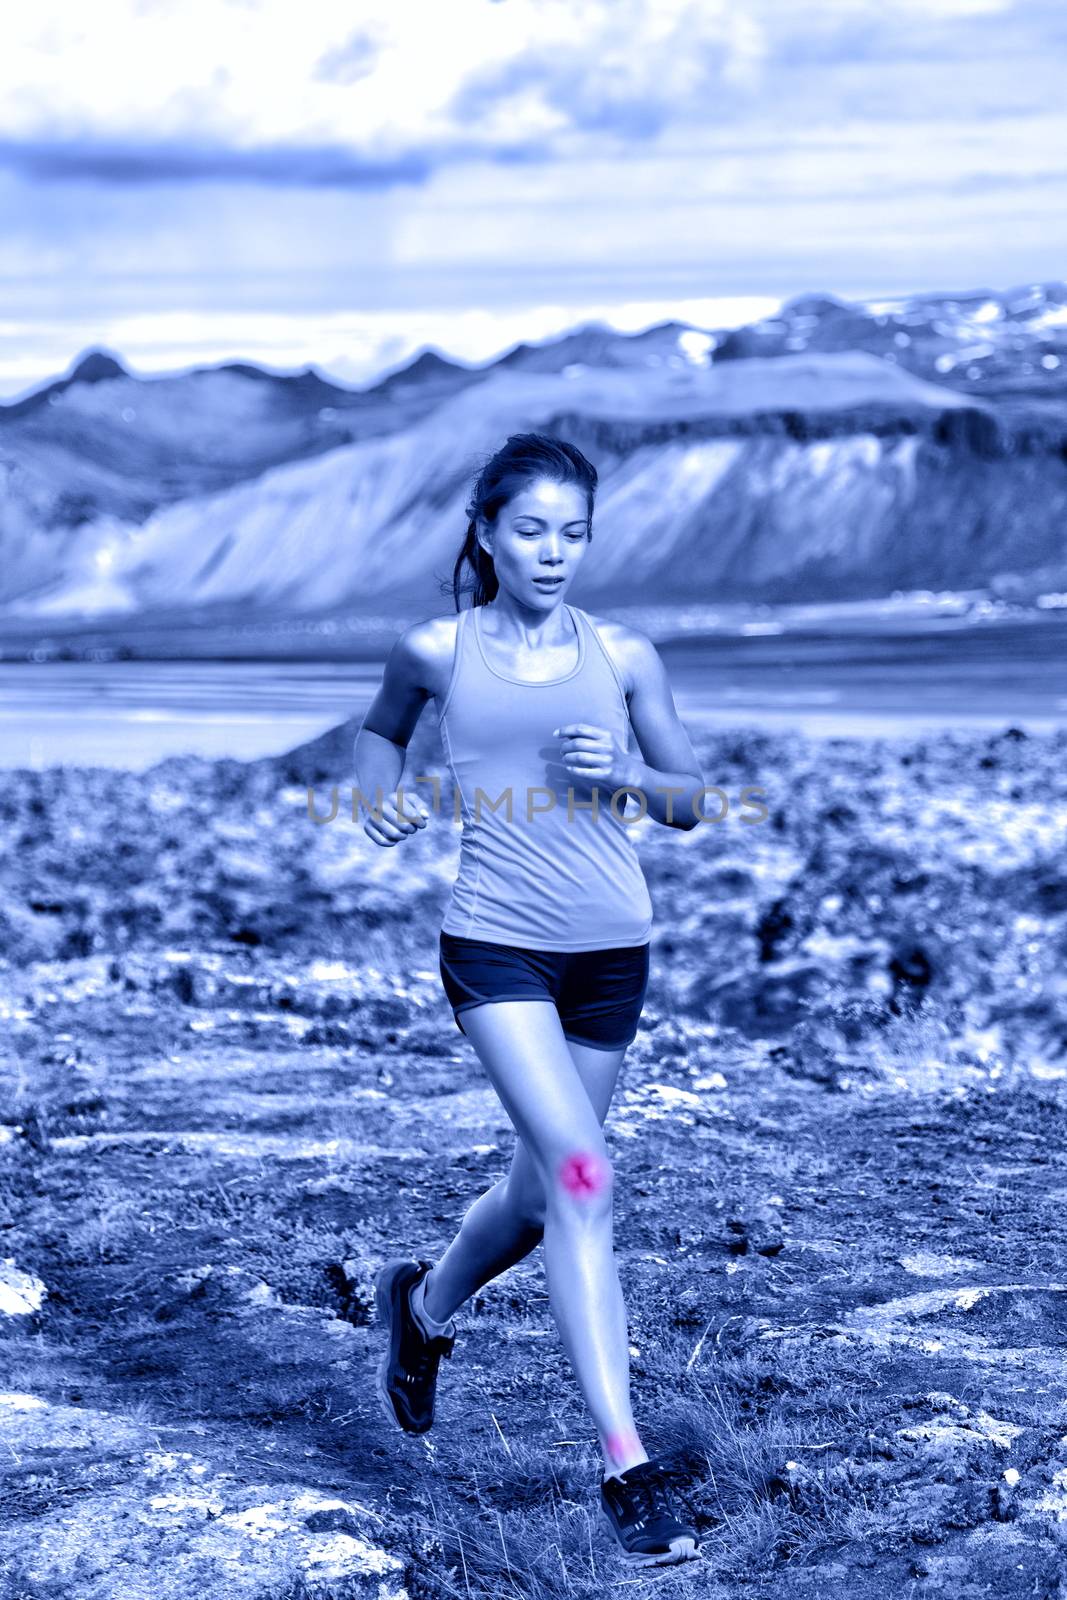 Sports woman portrait showing joints injuries. Active fitness lifestyle can cause ankle and knee sprains showed by red circles on body of female trail runner in nature. Blue monochrome filter.